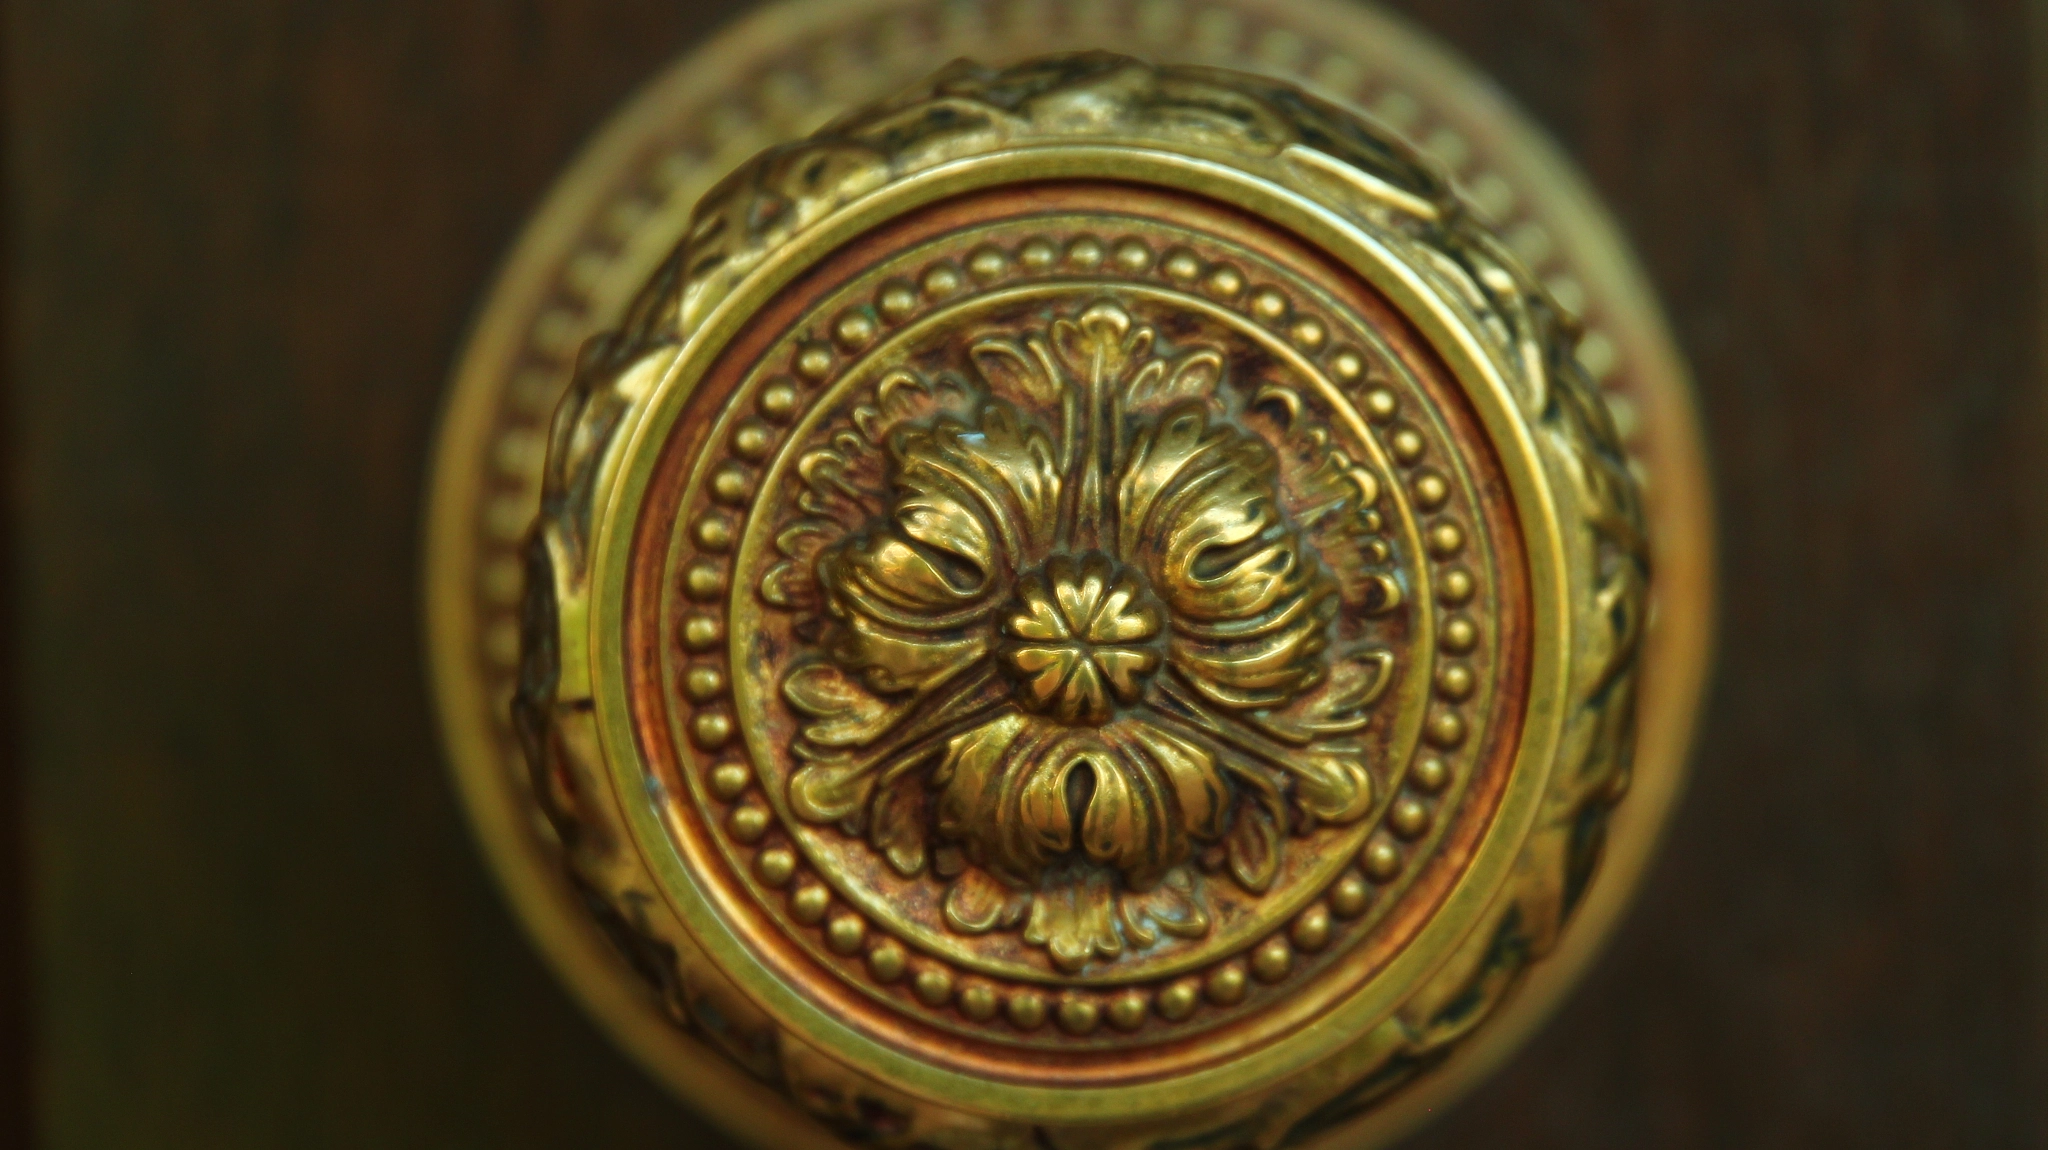 Canon EOS 60D + Sigma 24-105mm f/4 DG OS HSM | A sample photo. Gold knob in florence style. photography